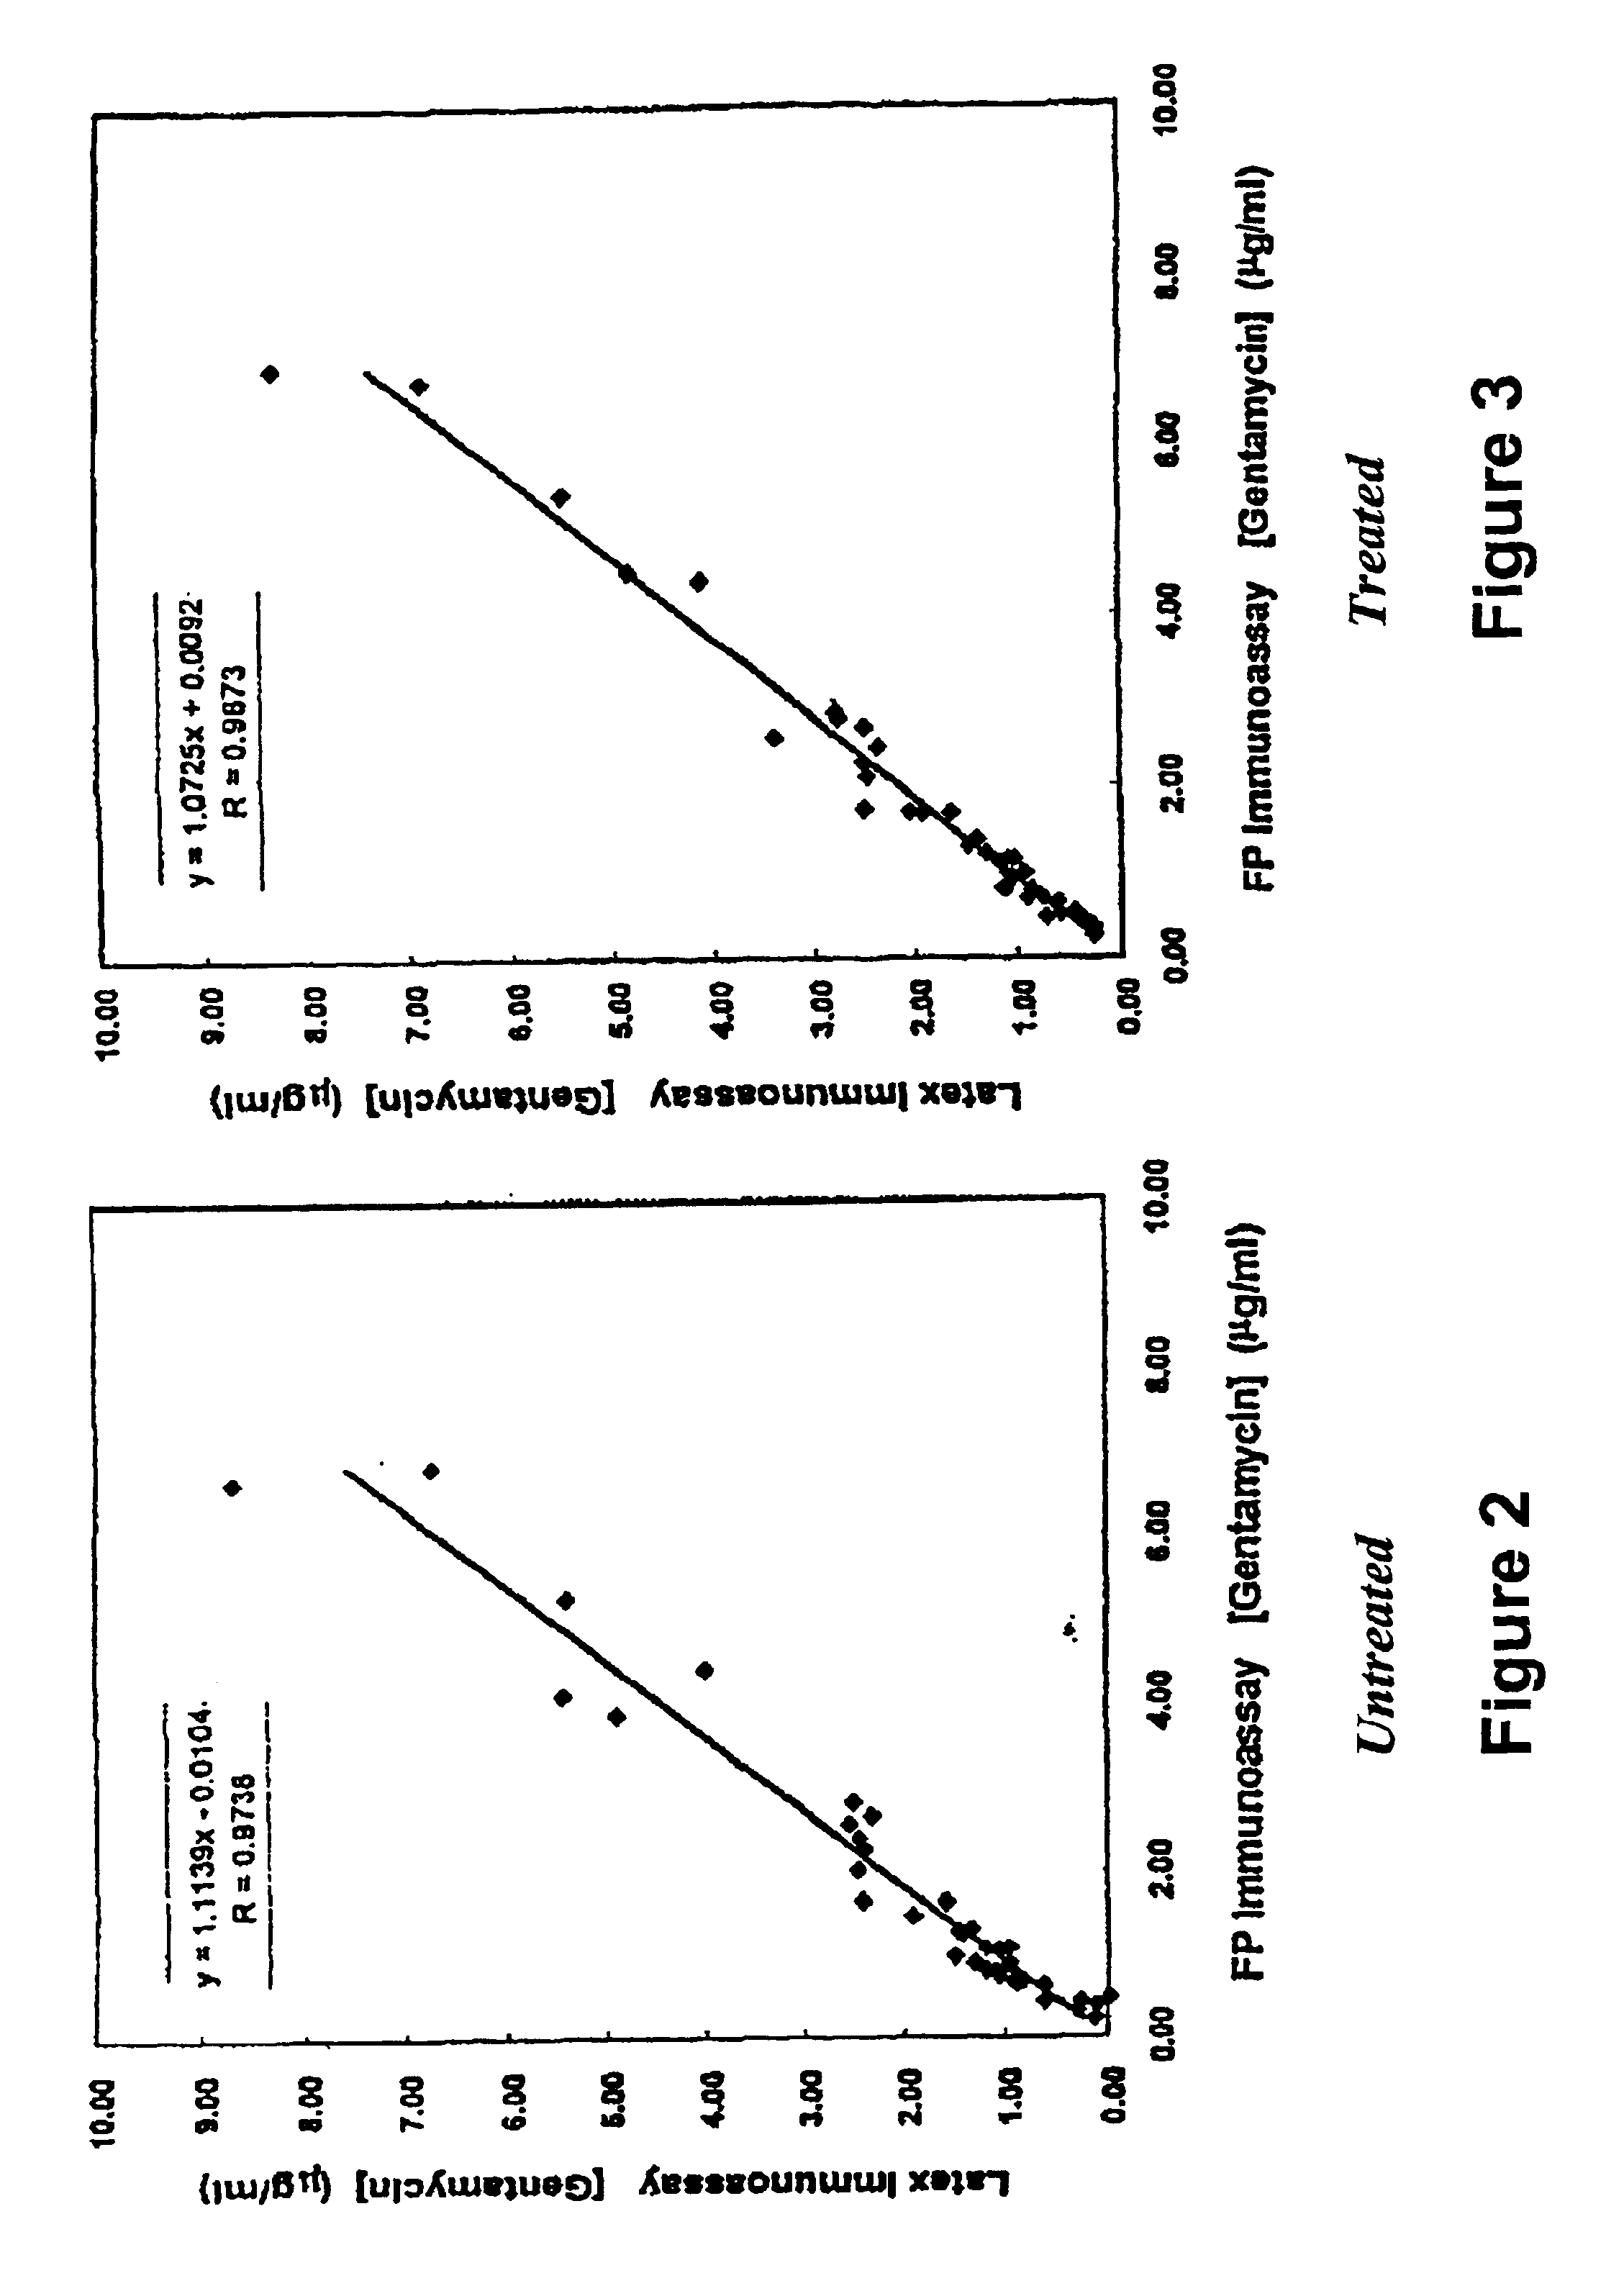 Particles for immunoassays and methods for treating the same